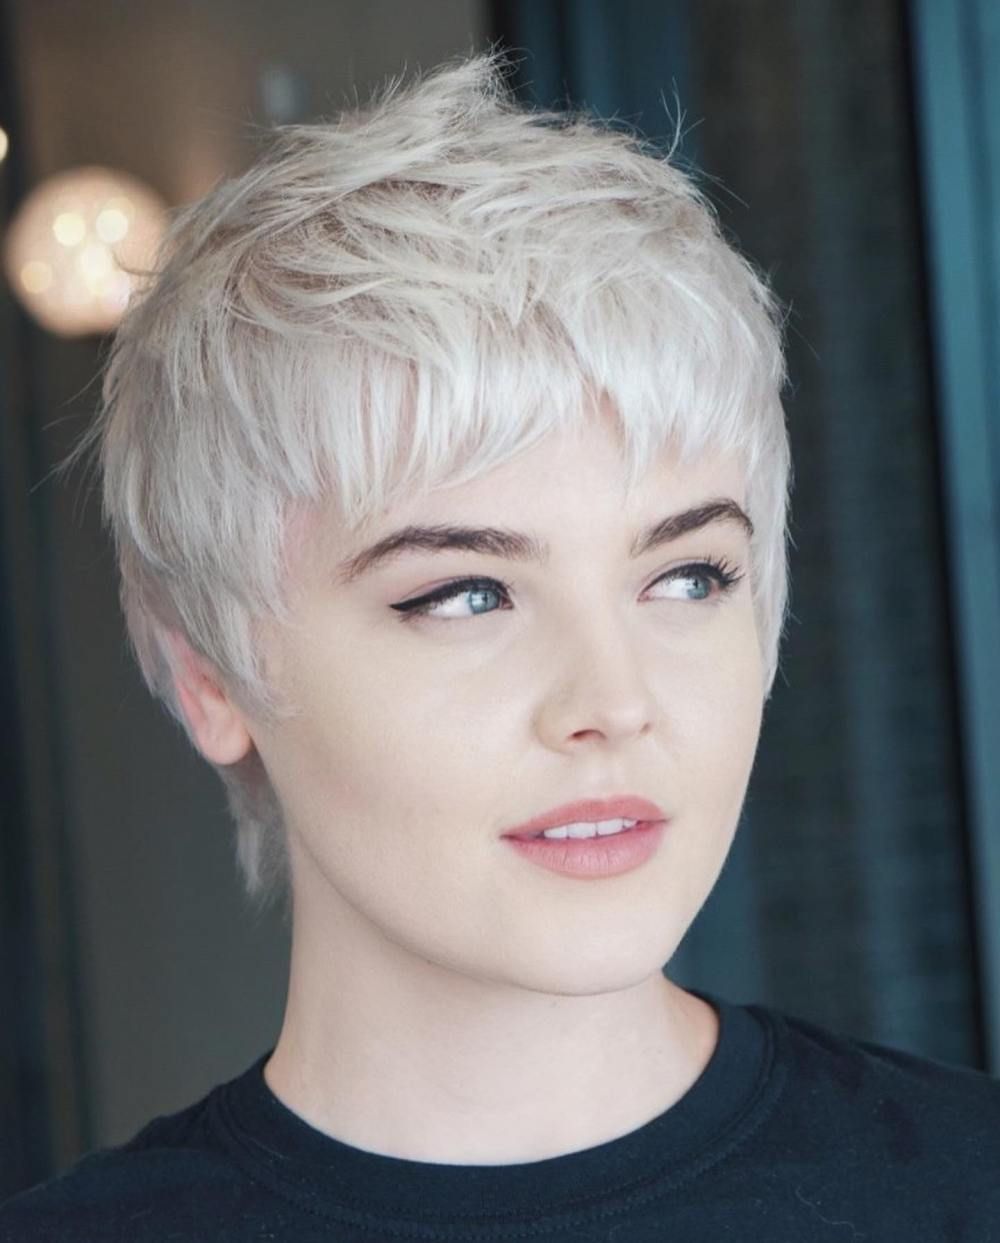 Short hairstyles for Round Face 19 Short hair for round face Asian | Short hairstyles for fat faces and double chins | Short hairstyles for round faces and thin hair Short Hairstyles for Round Face Women